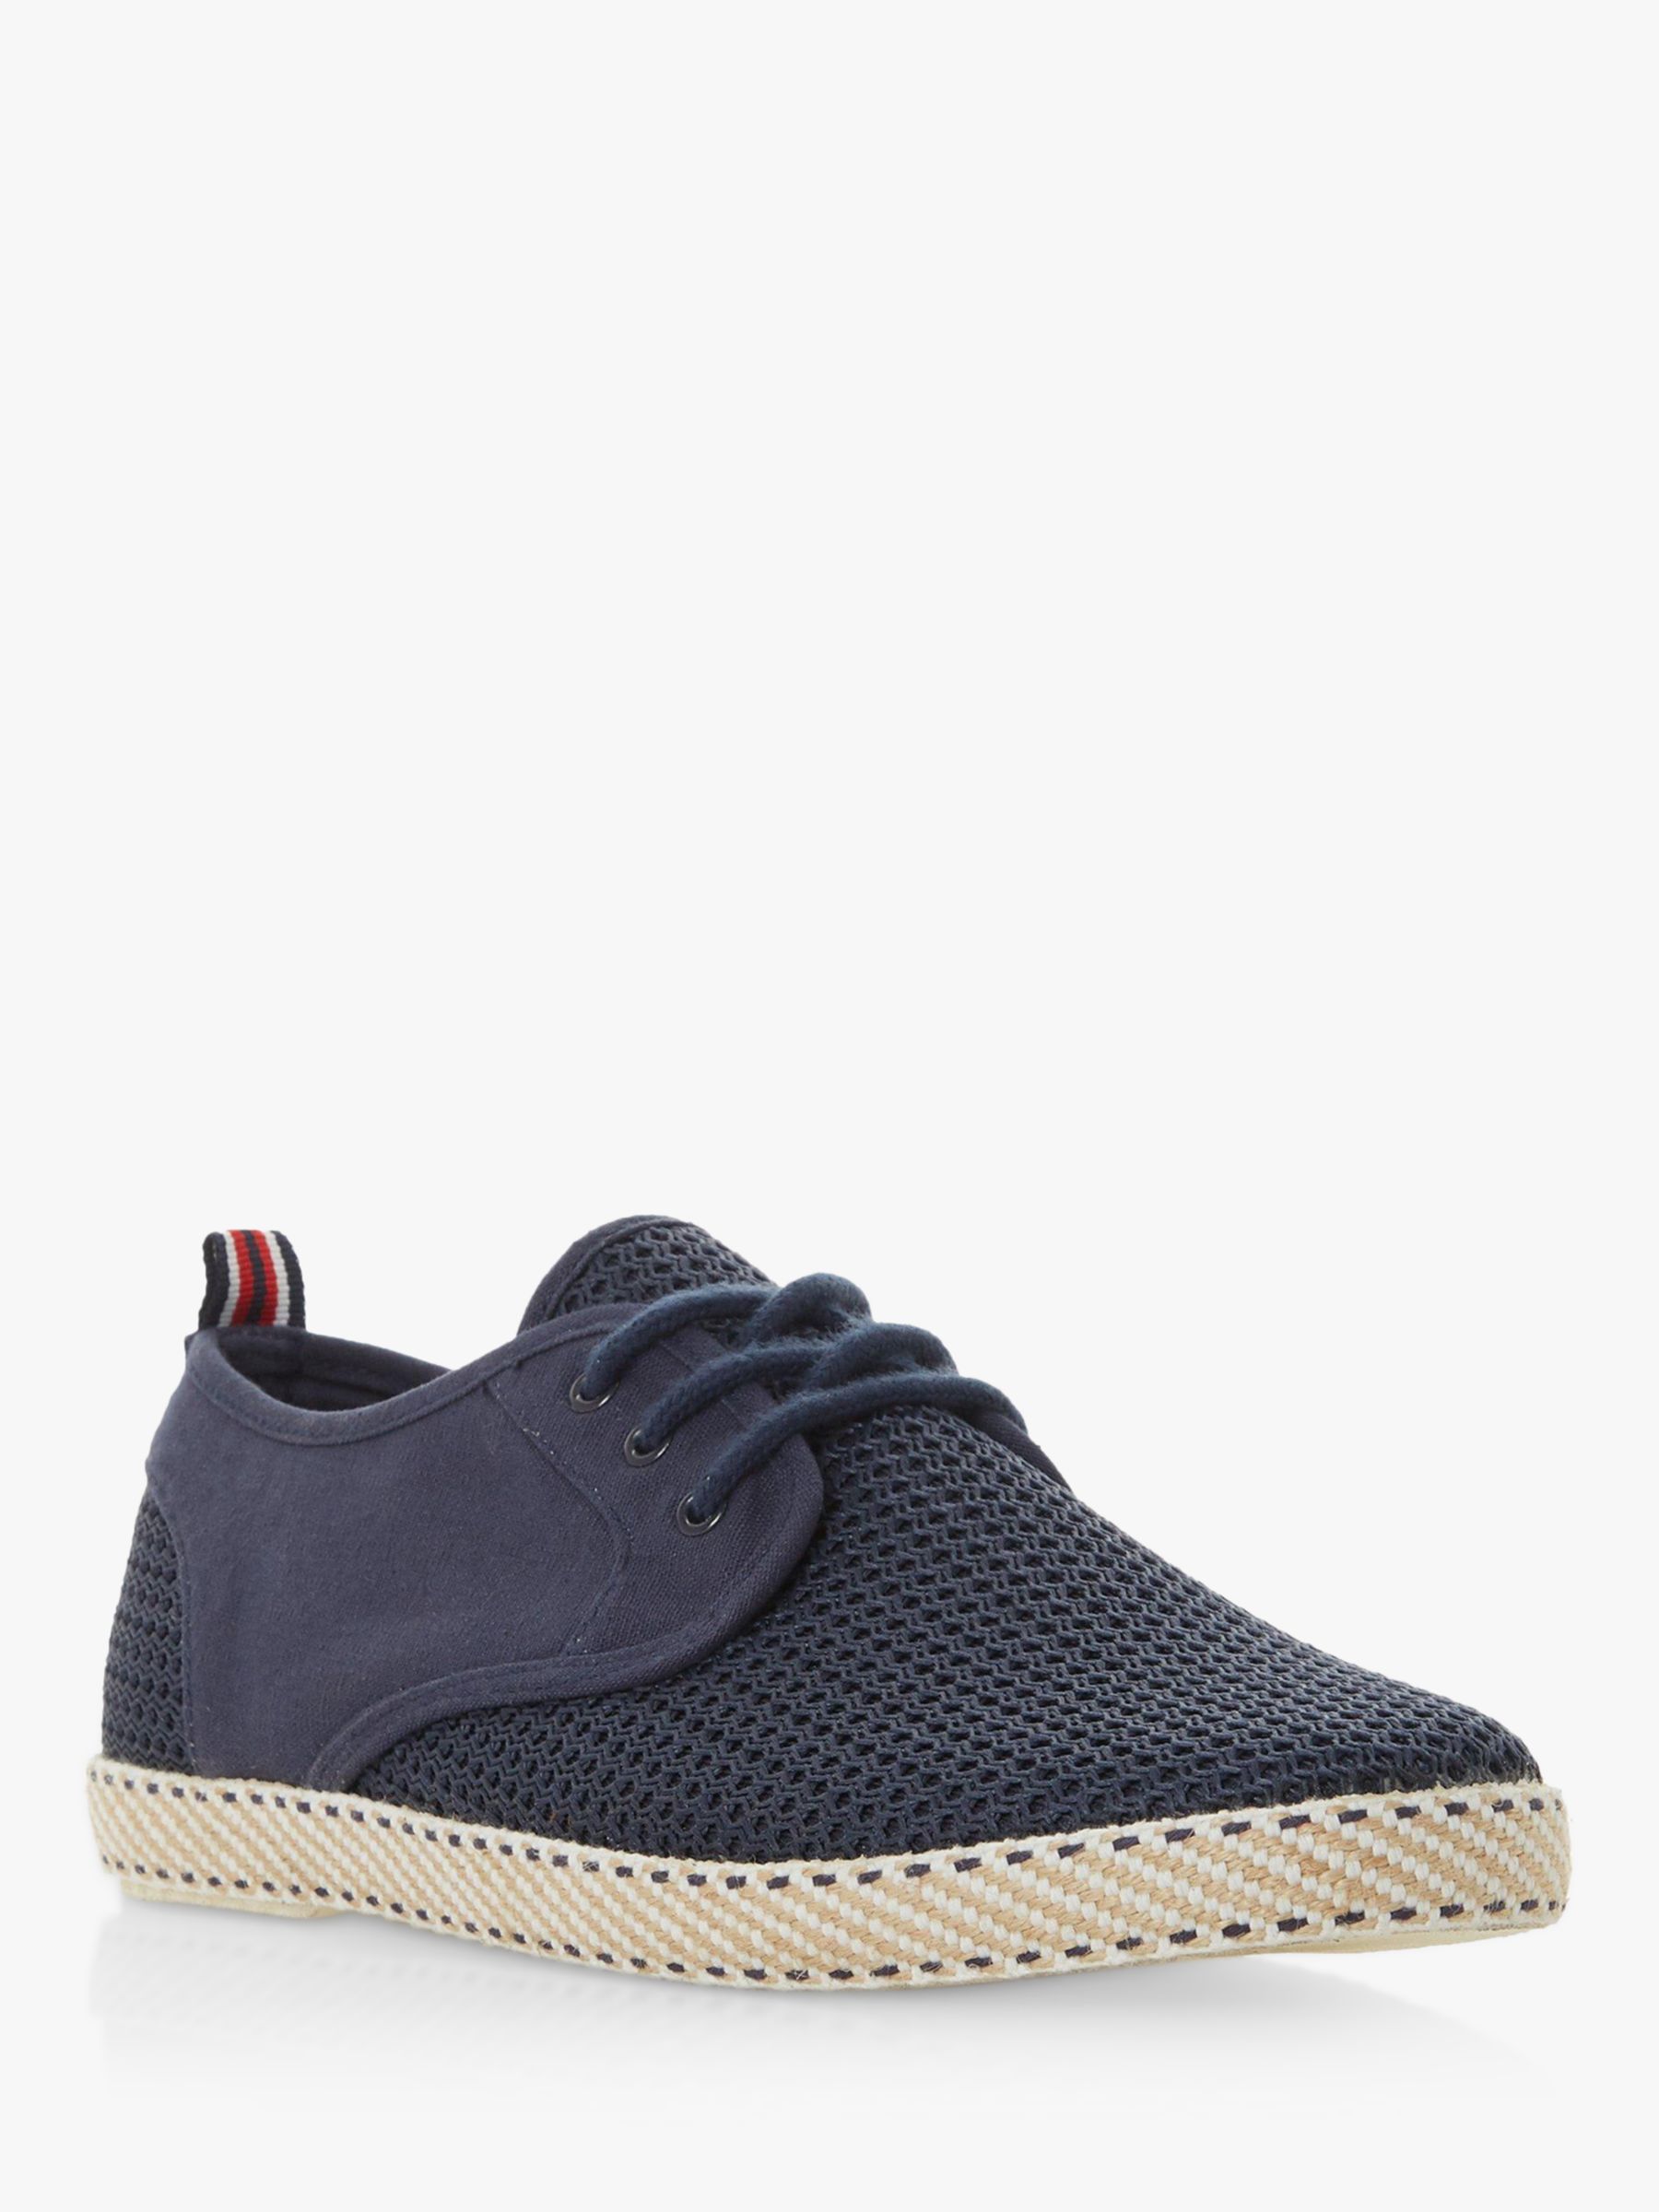 Dune Flash Canvas Casual Shoes, Navy-canvas at John Lewis & Partners